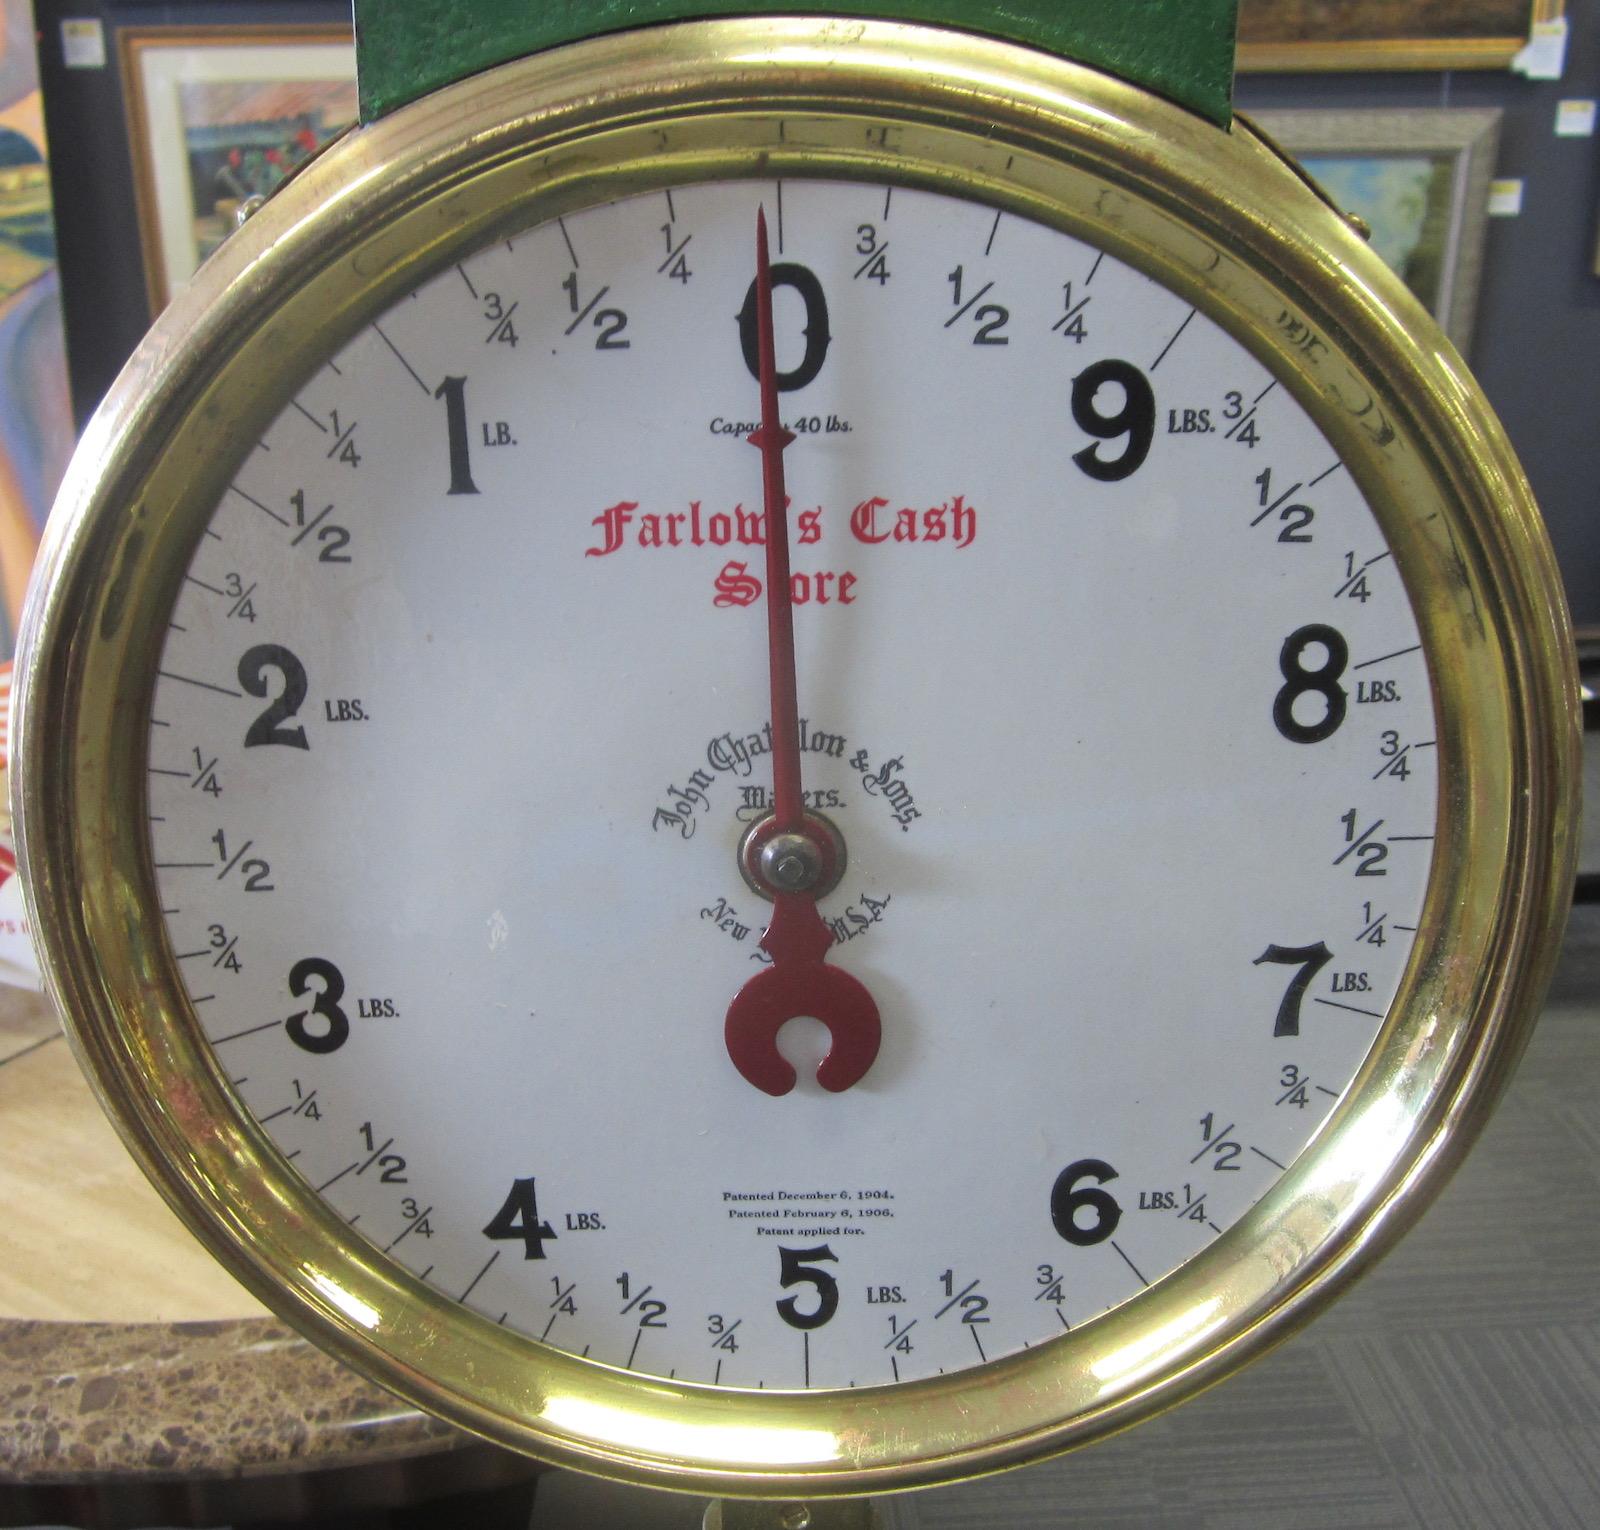 Vintage double sided scales from Farlow Cash Store, Mourilyan, Queensland, Australia.
chrome plated frame, marble base, made by John Chattilon & Sons, New York
Our eclectic stock crosses cultures, continents, styles and famous names.